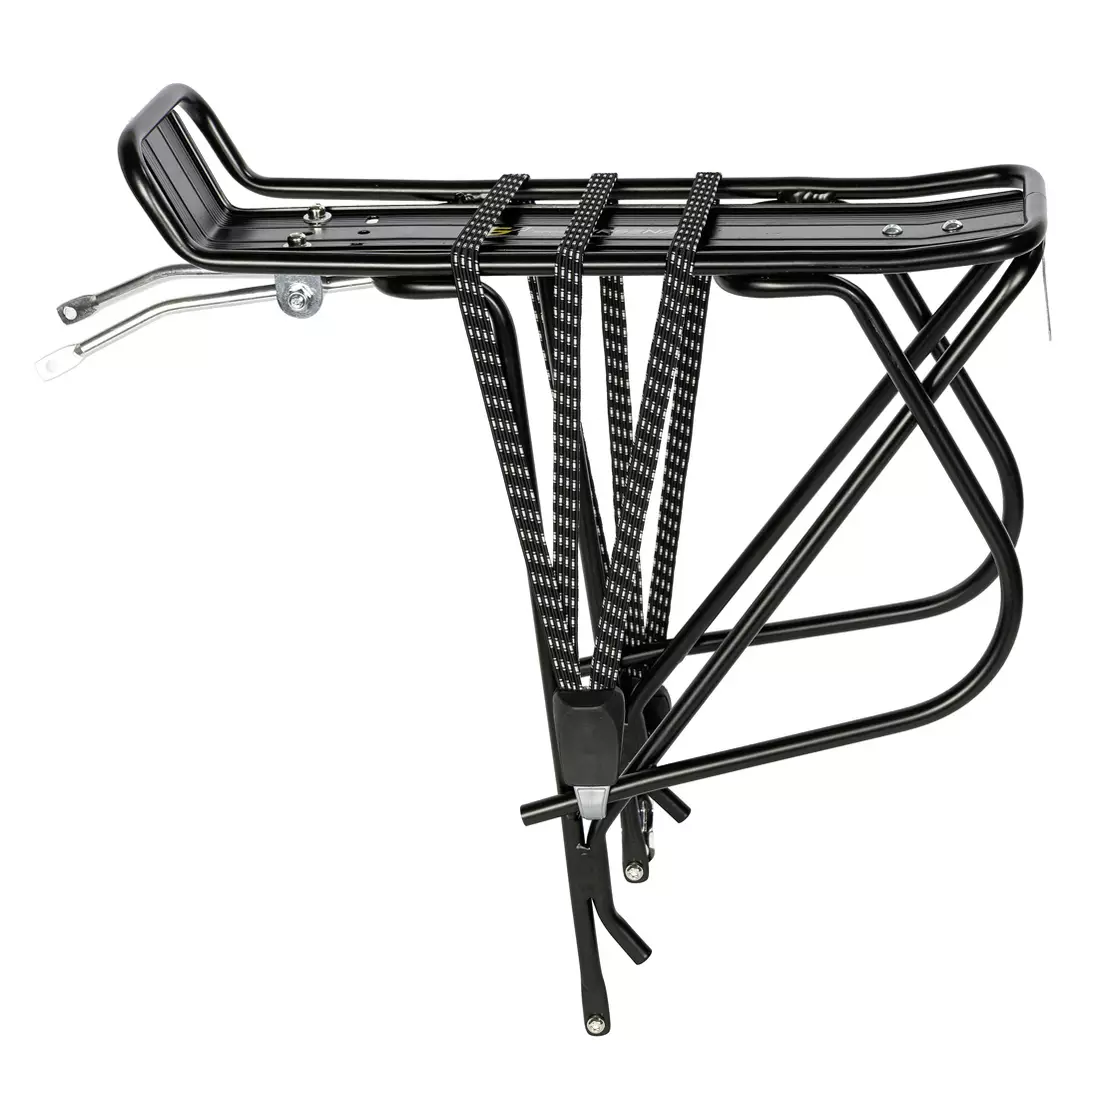 SPORT ARSENAL 215 - aluminum rear bicycle rack for transporting panniers, black